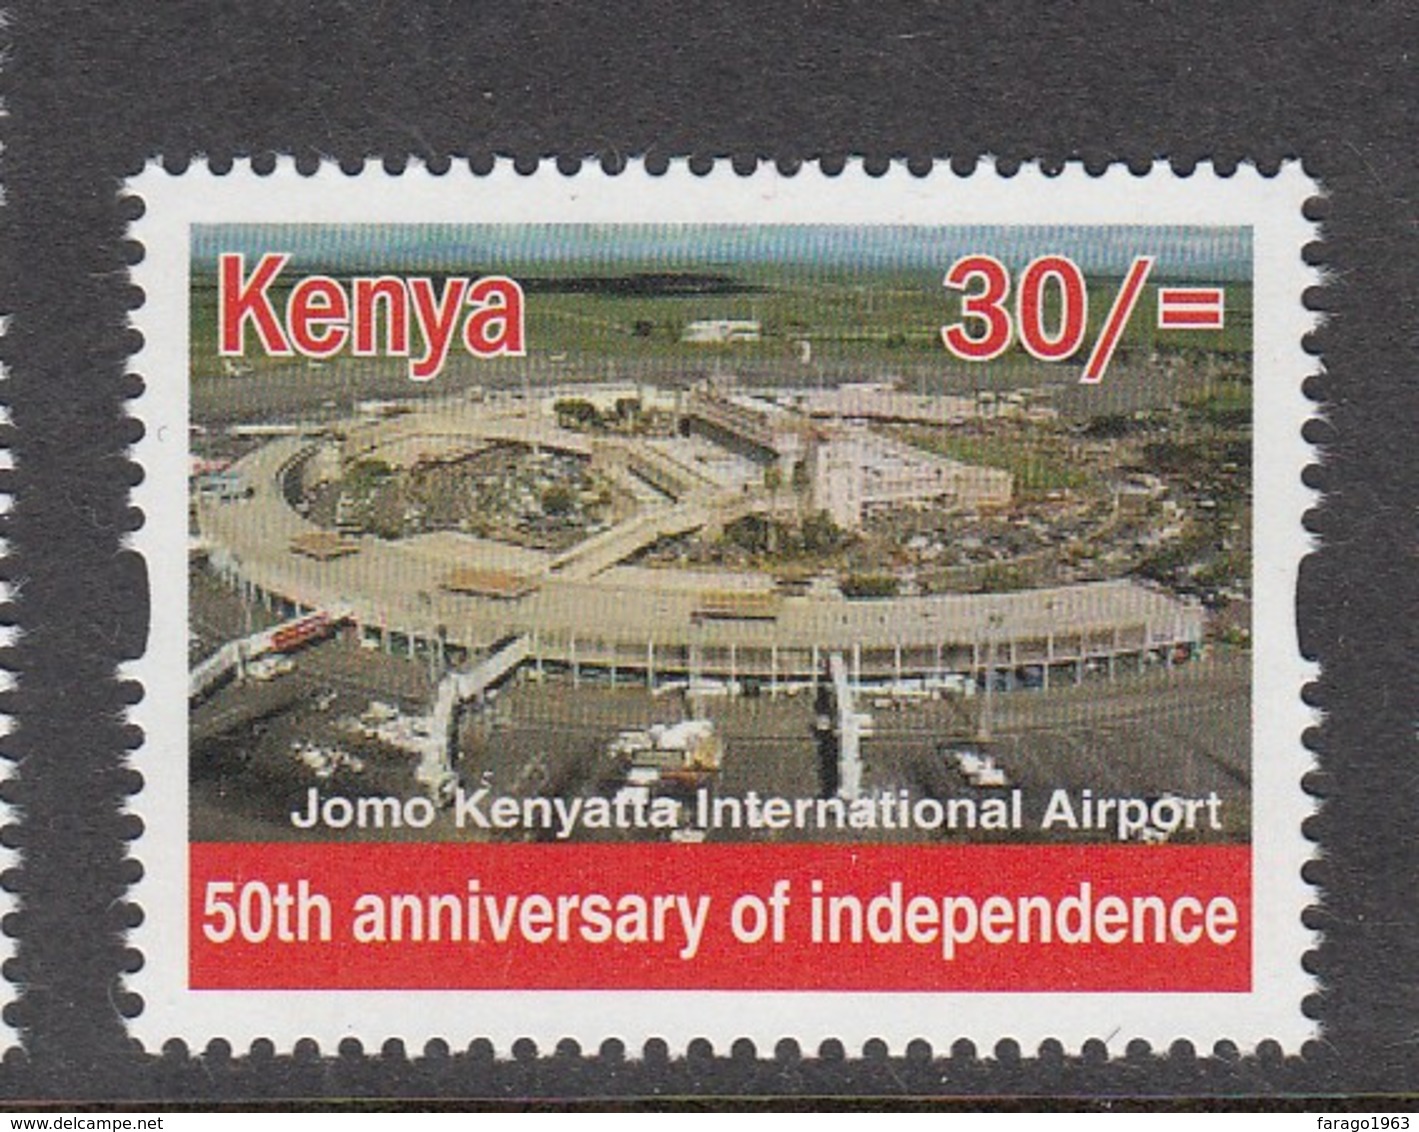 Kenya 2013 30/- JKIA Airport - Taken Out Of Sheet Of 25 Different Stamps - Cheaper Than Buying Sheet!! - Sonstige (Luft)